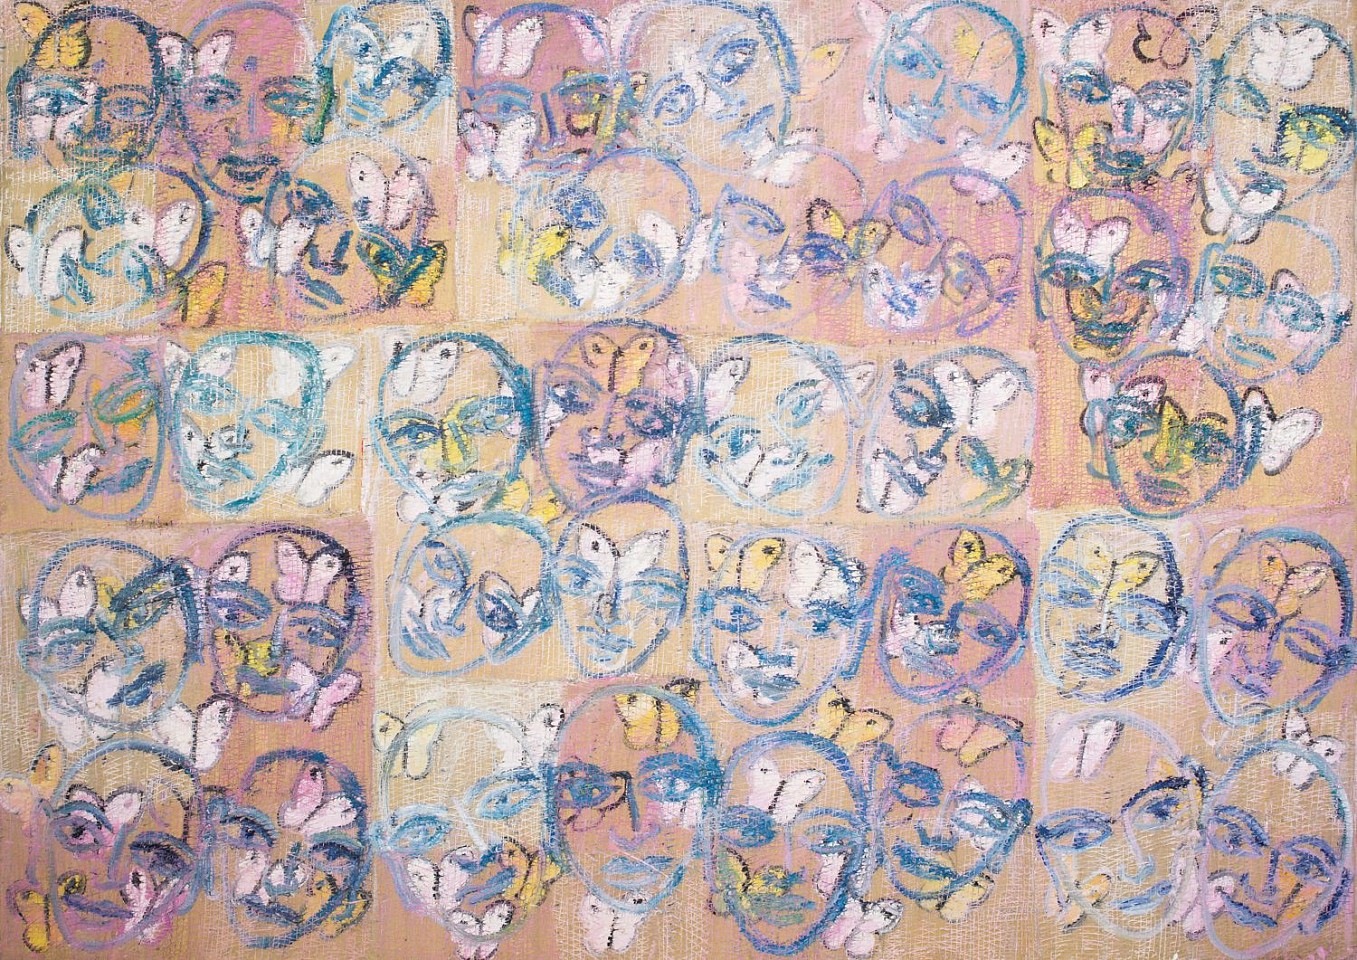 Hunt Slonem, Siddhas and Butterflies Play of Consciousness, 2008
Oil on Canvas, 68 x 98 in. (172.7 x 248.9 cm)
7625